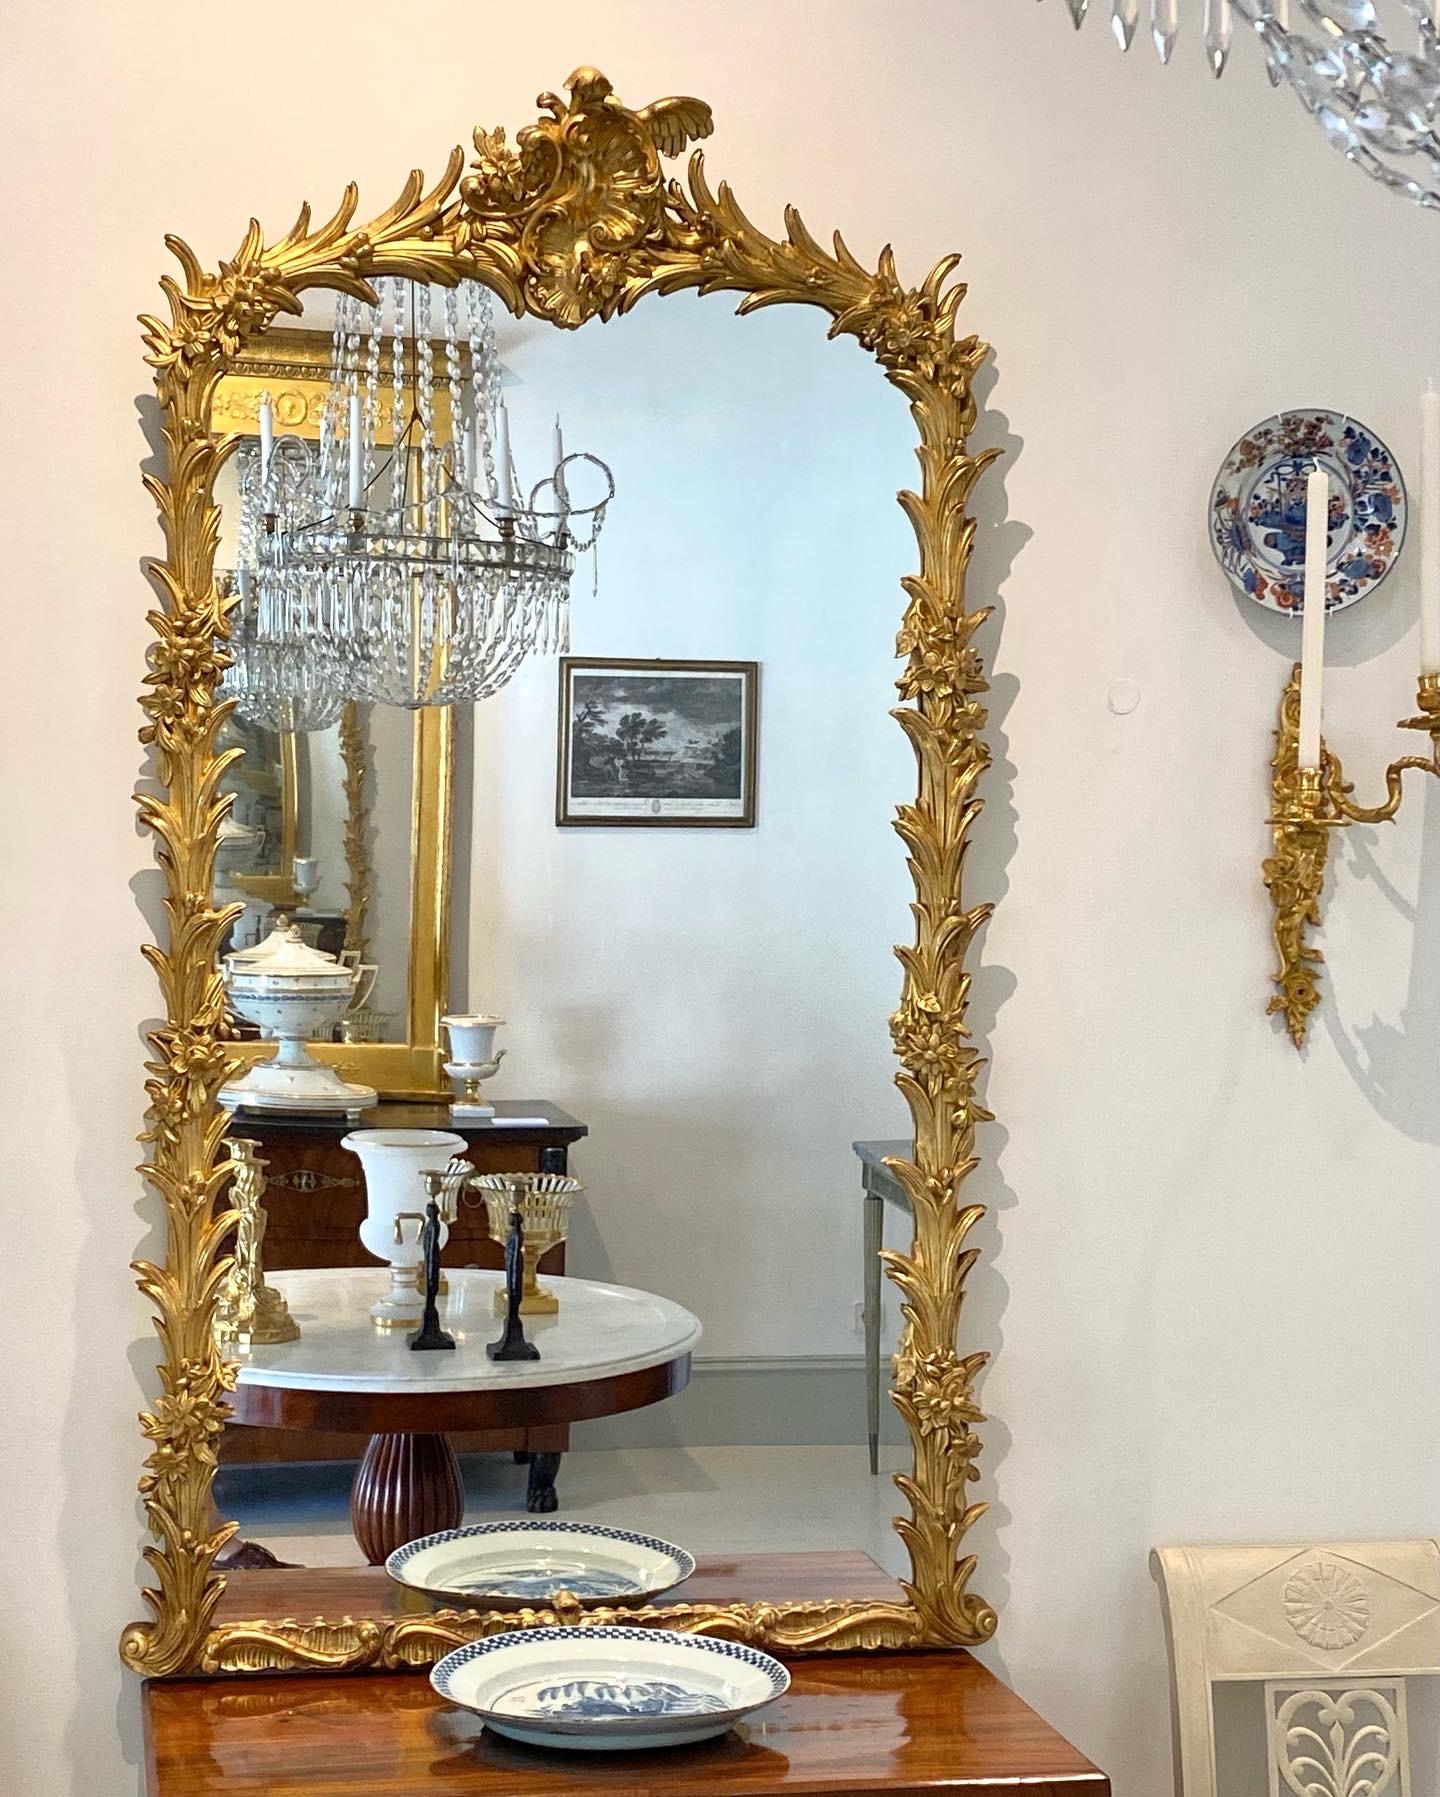 Spanish neo rococo mirror after original 18th century models design by the famous Italian architects Sempronio Subissati and Giovanni Battista Sachetti for the Royal Palace of La Granja in Segovia, Spain.
The mirror was made in the middle of the